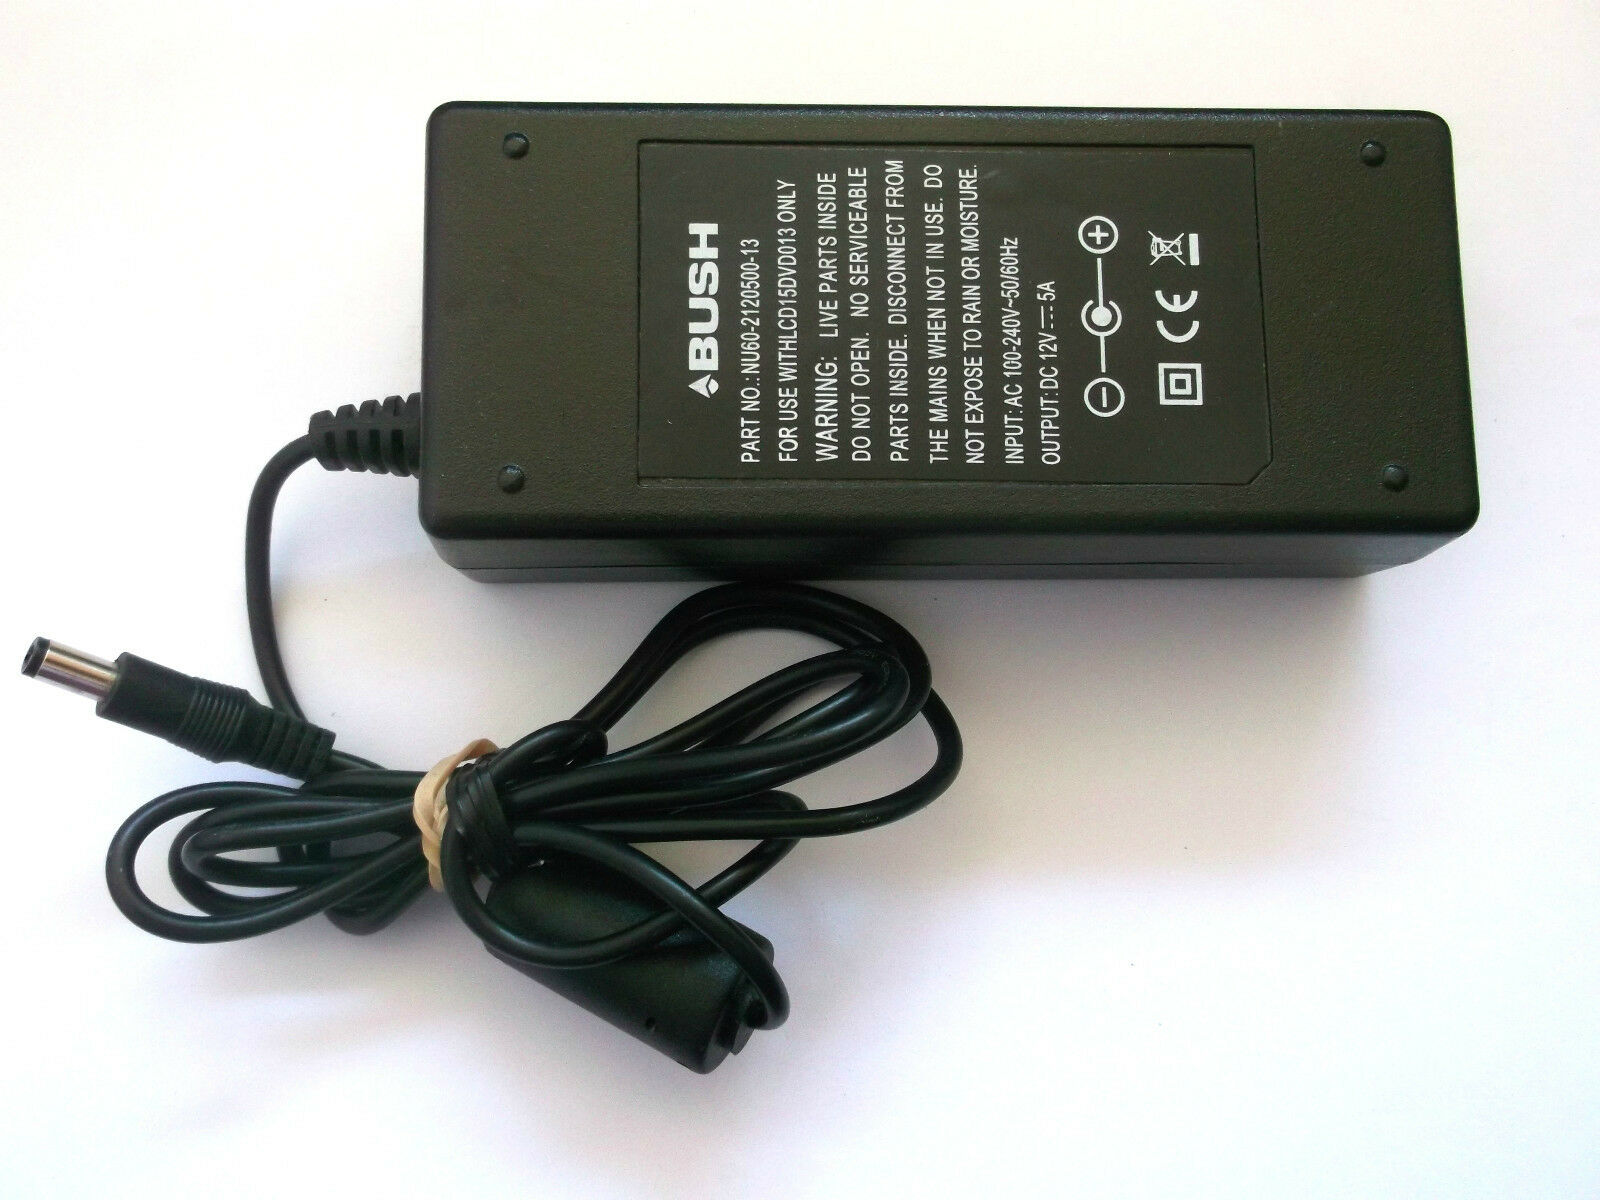 NEW Bush LCDS20TV007 NU60-2120500-13 12V 5.0A POWER SUPPLY CHARGER